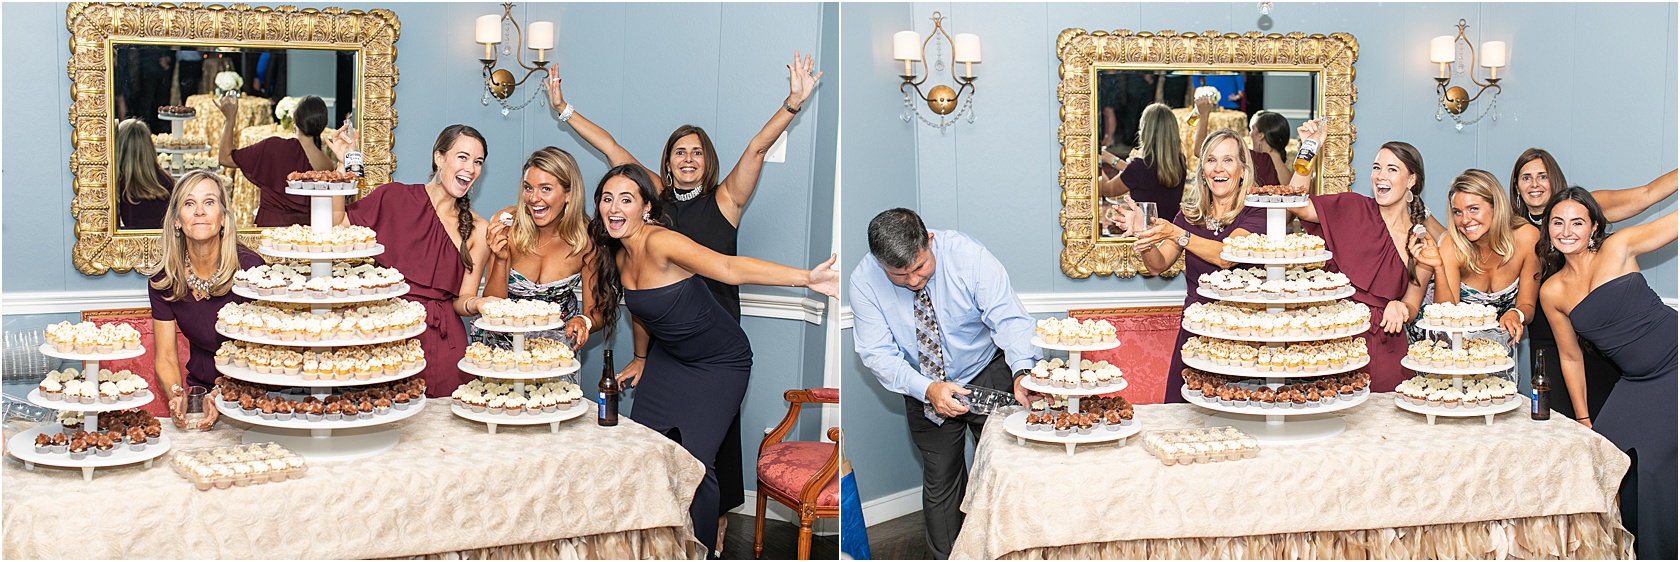  Love this. The baking team was a family attending the wedding and we told them they were a real vendor… they cheered! 